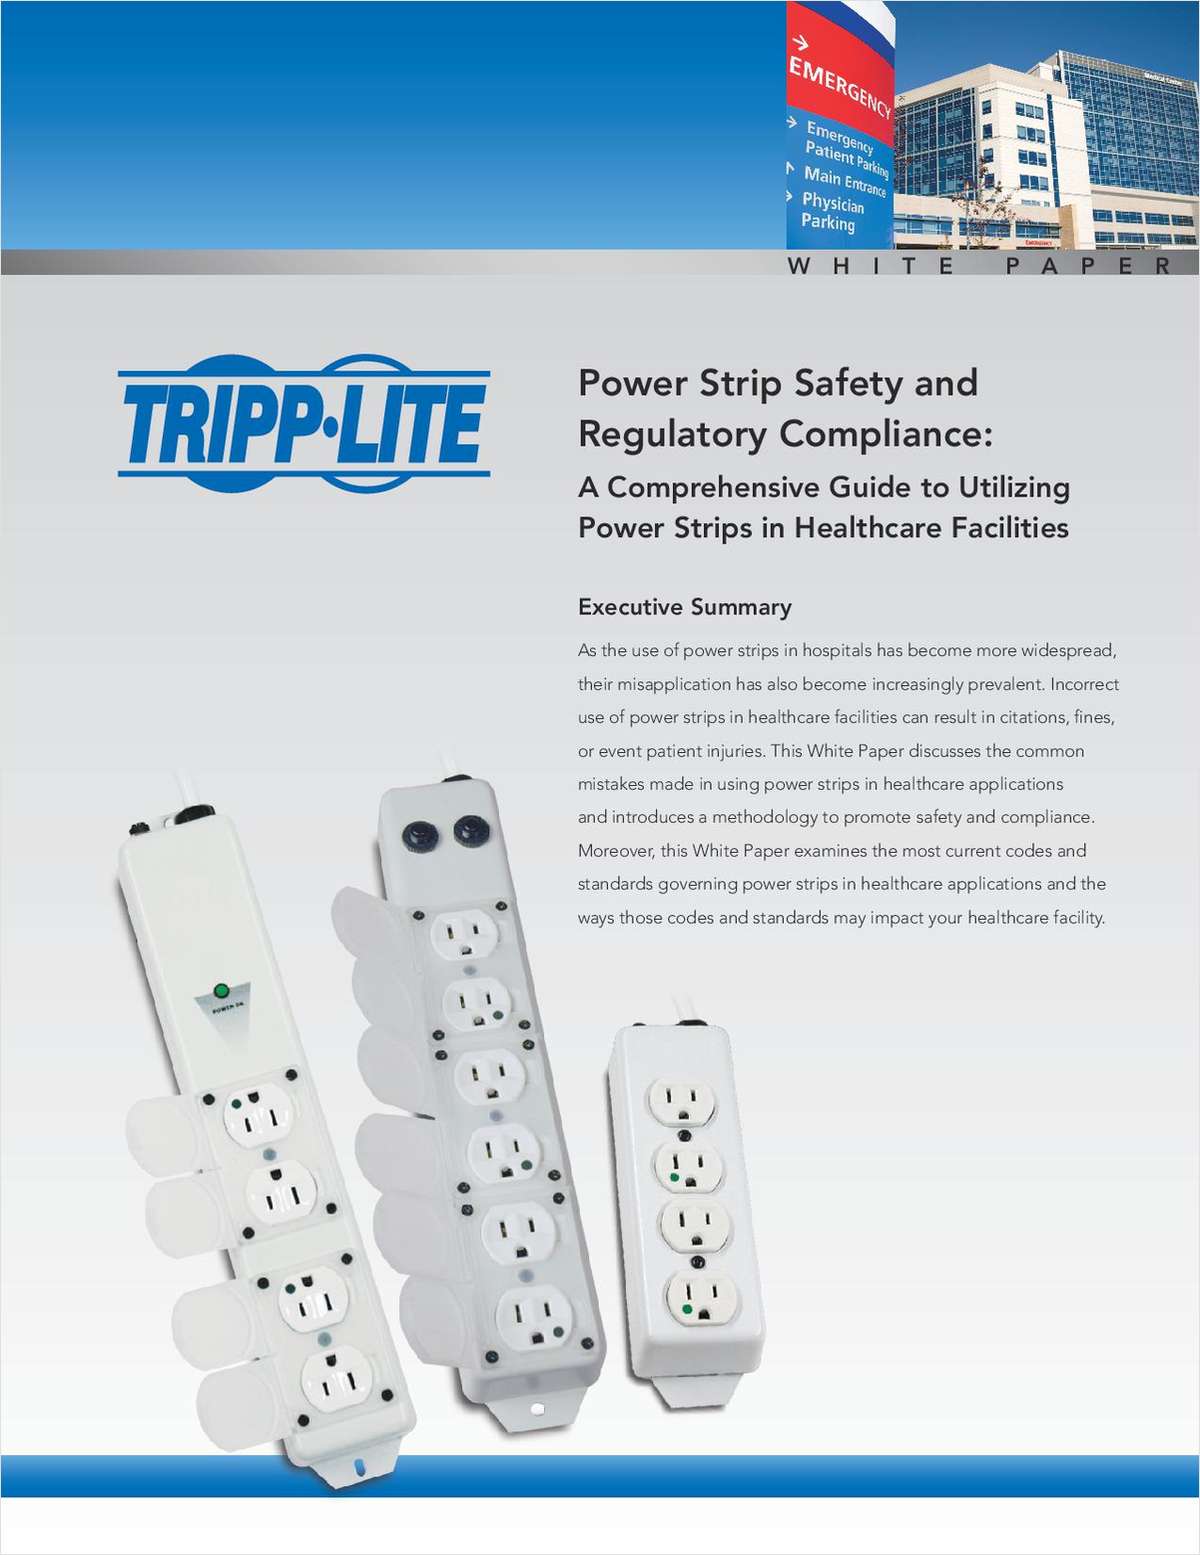 Power Strip Safety and Regulatory Compliance